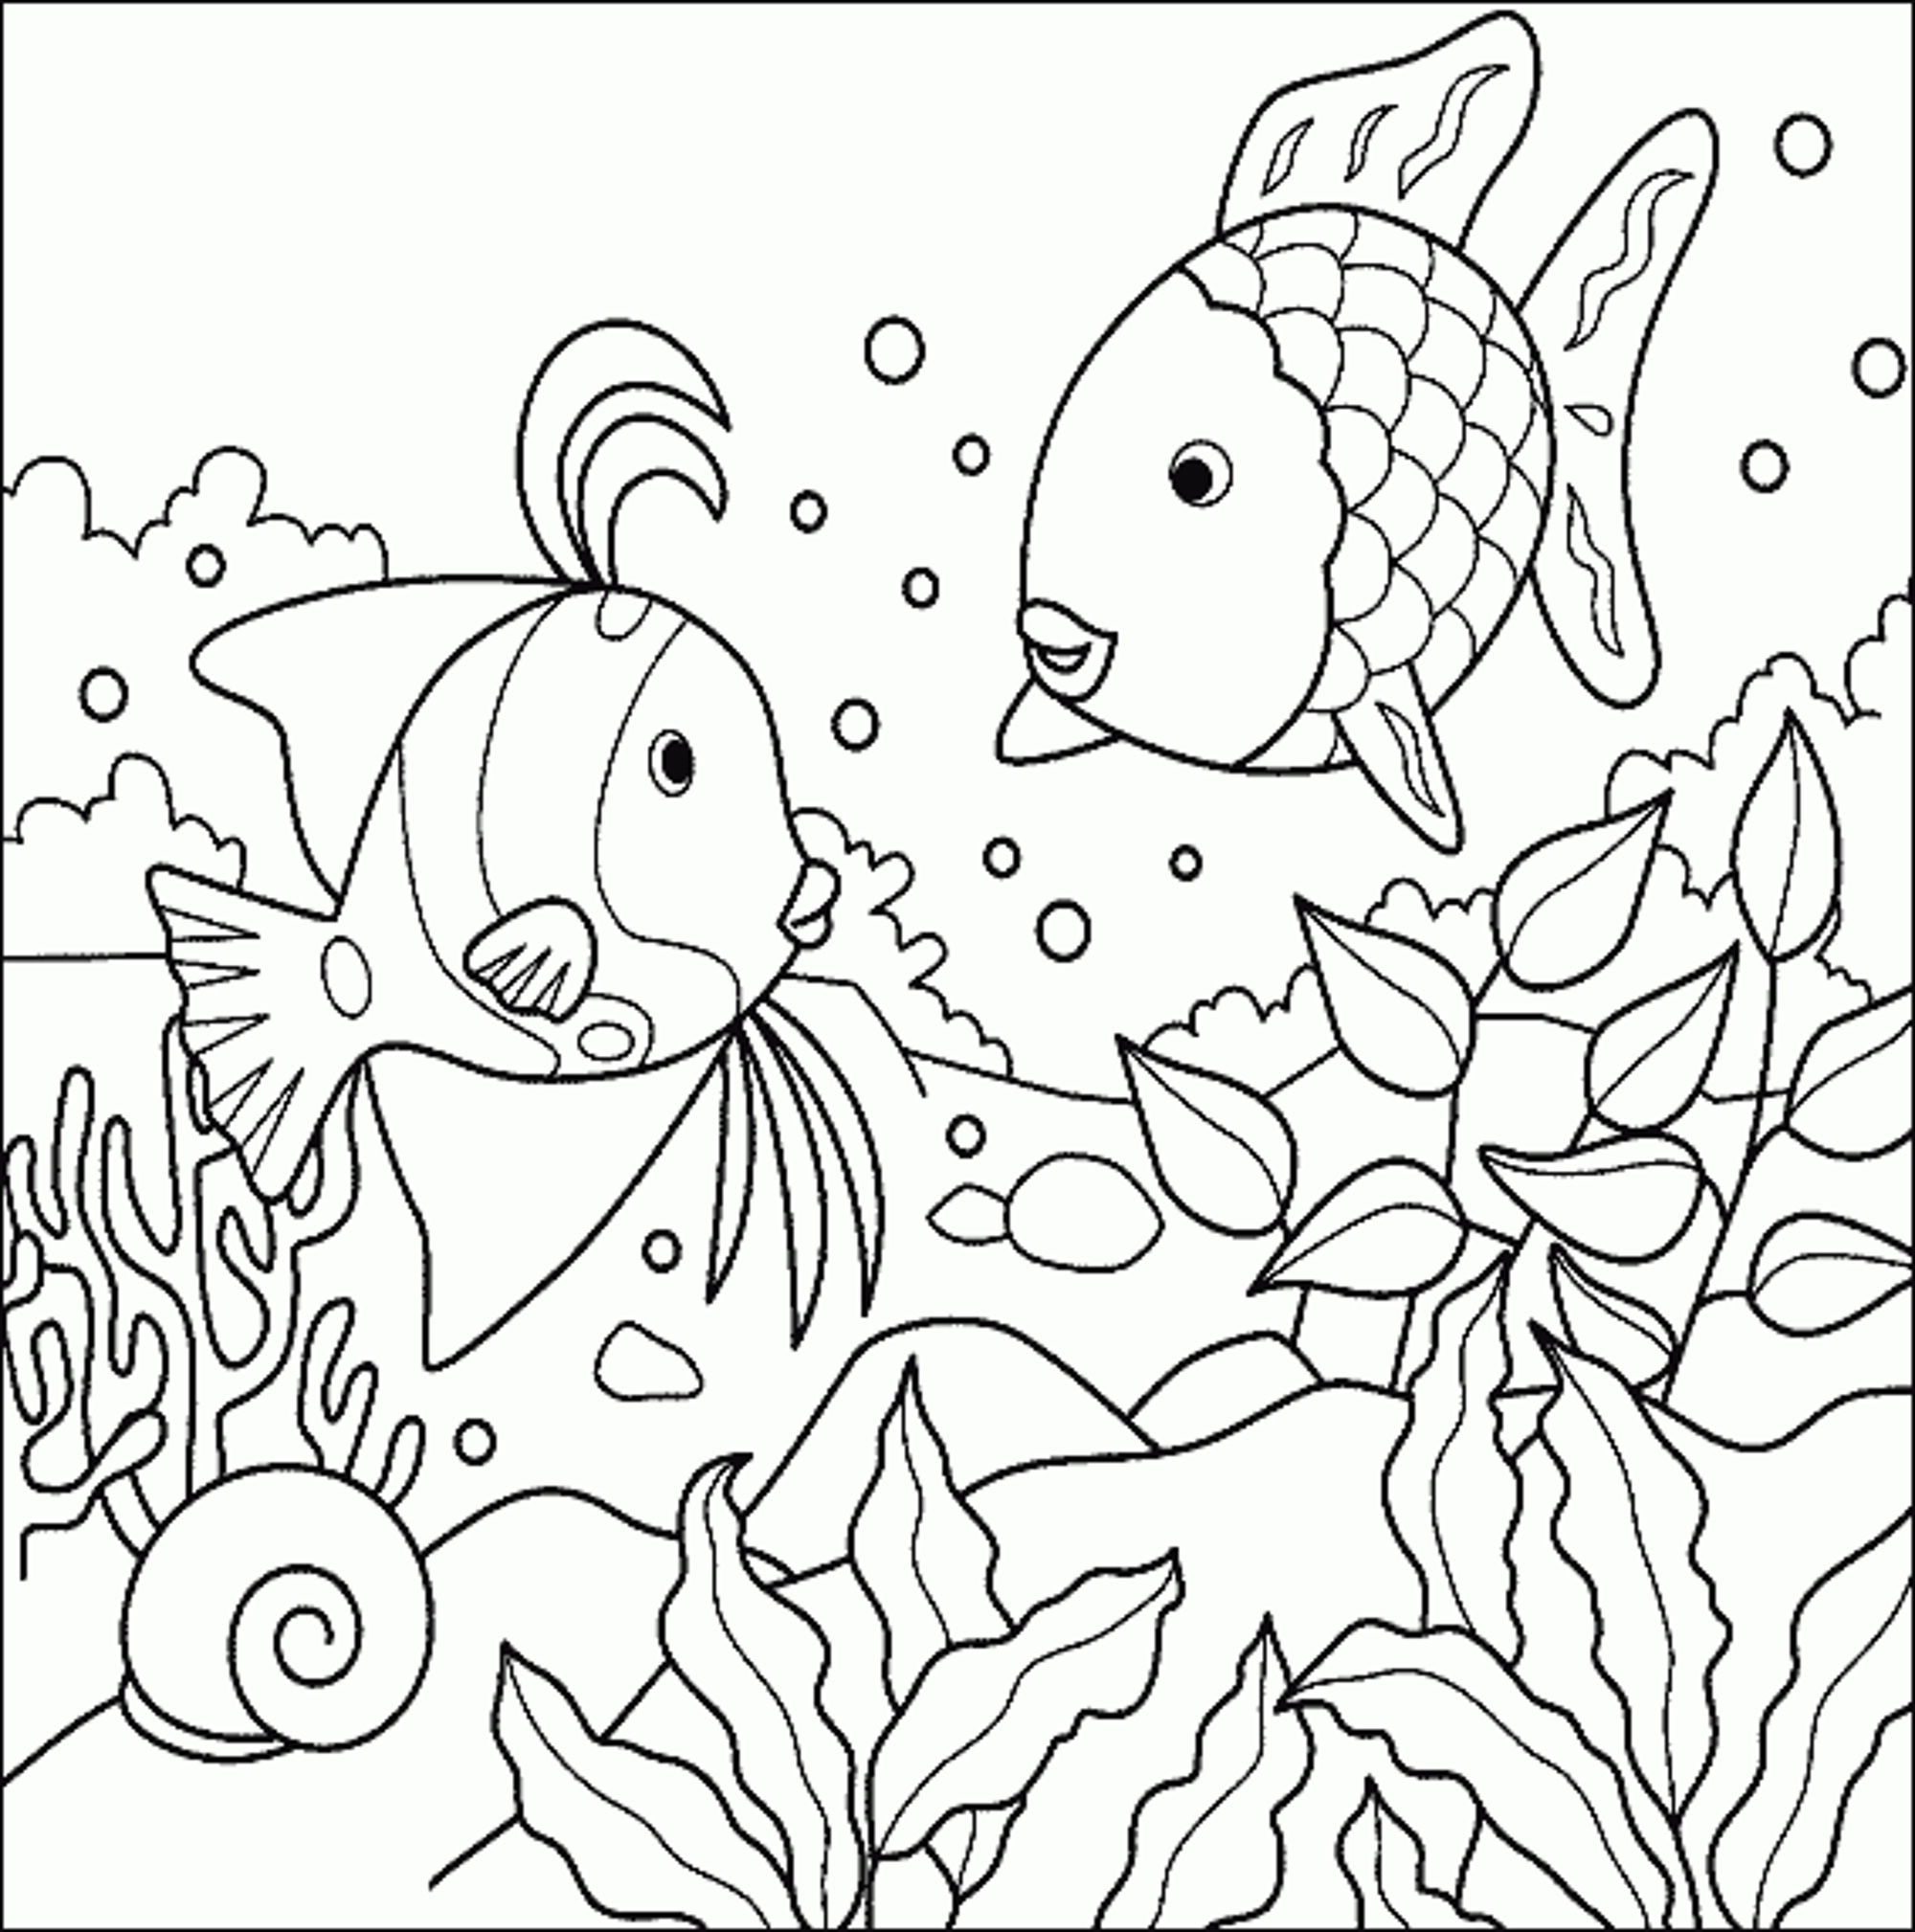 tropical fish coloring page     BestAppsForKids.com